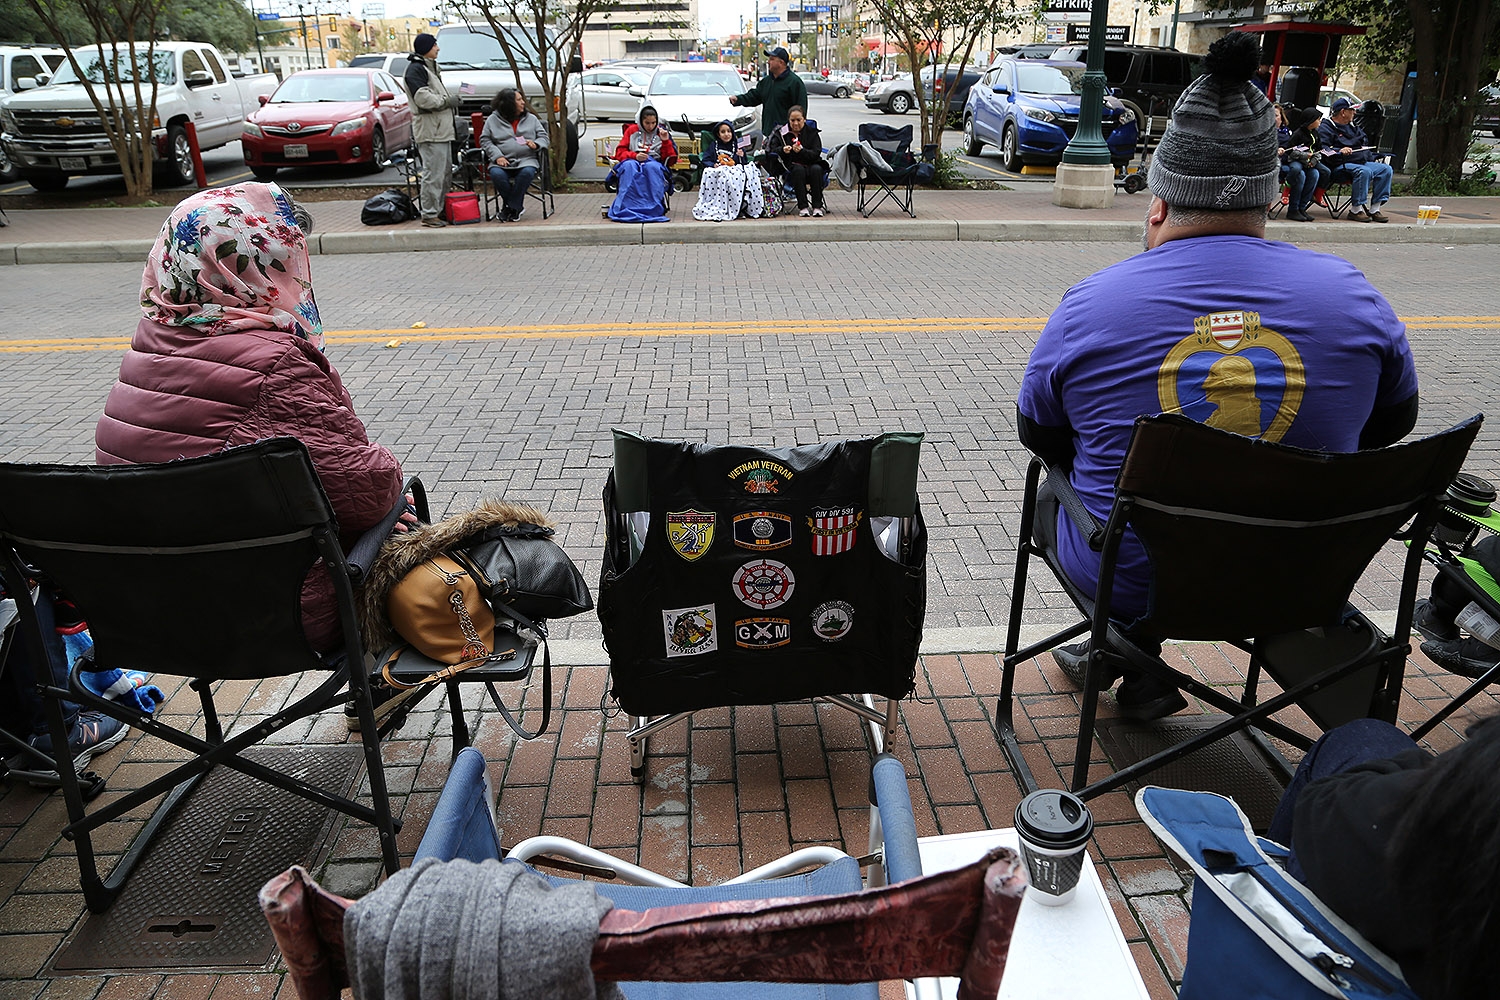 Sylvia Armendariz (left) sits next to a chair where her husband, Wenceslo, a Vietnam War veteran, would have sat. Wenceslo, who went by “Corky,” died on Memorial Day of this year. His family and friends came out to the Veterans Day Parade today to remember Corky and support other veterans. The Navy gunner’s mate received two Purple Hearts and the Bronze Star. He was 70. <em><b>Photo by Ben Olivo | Heron</b></em>